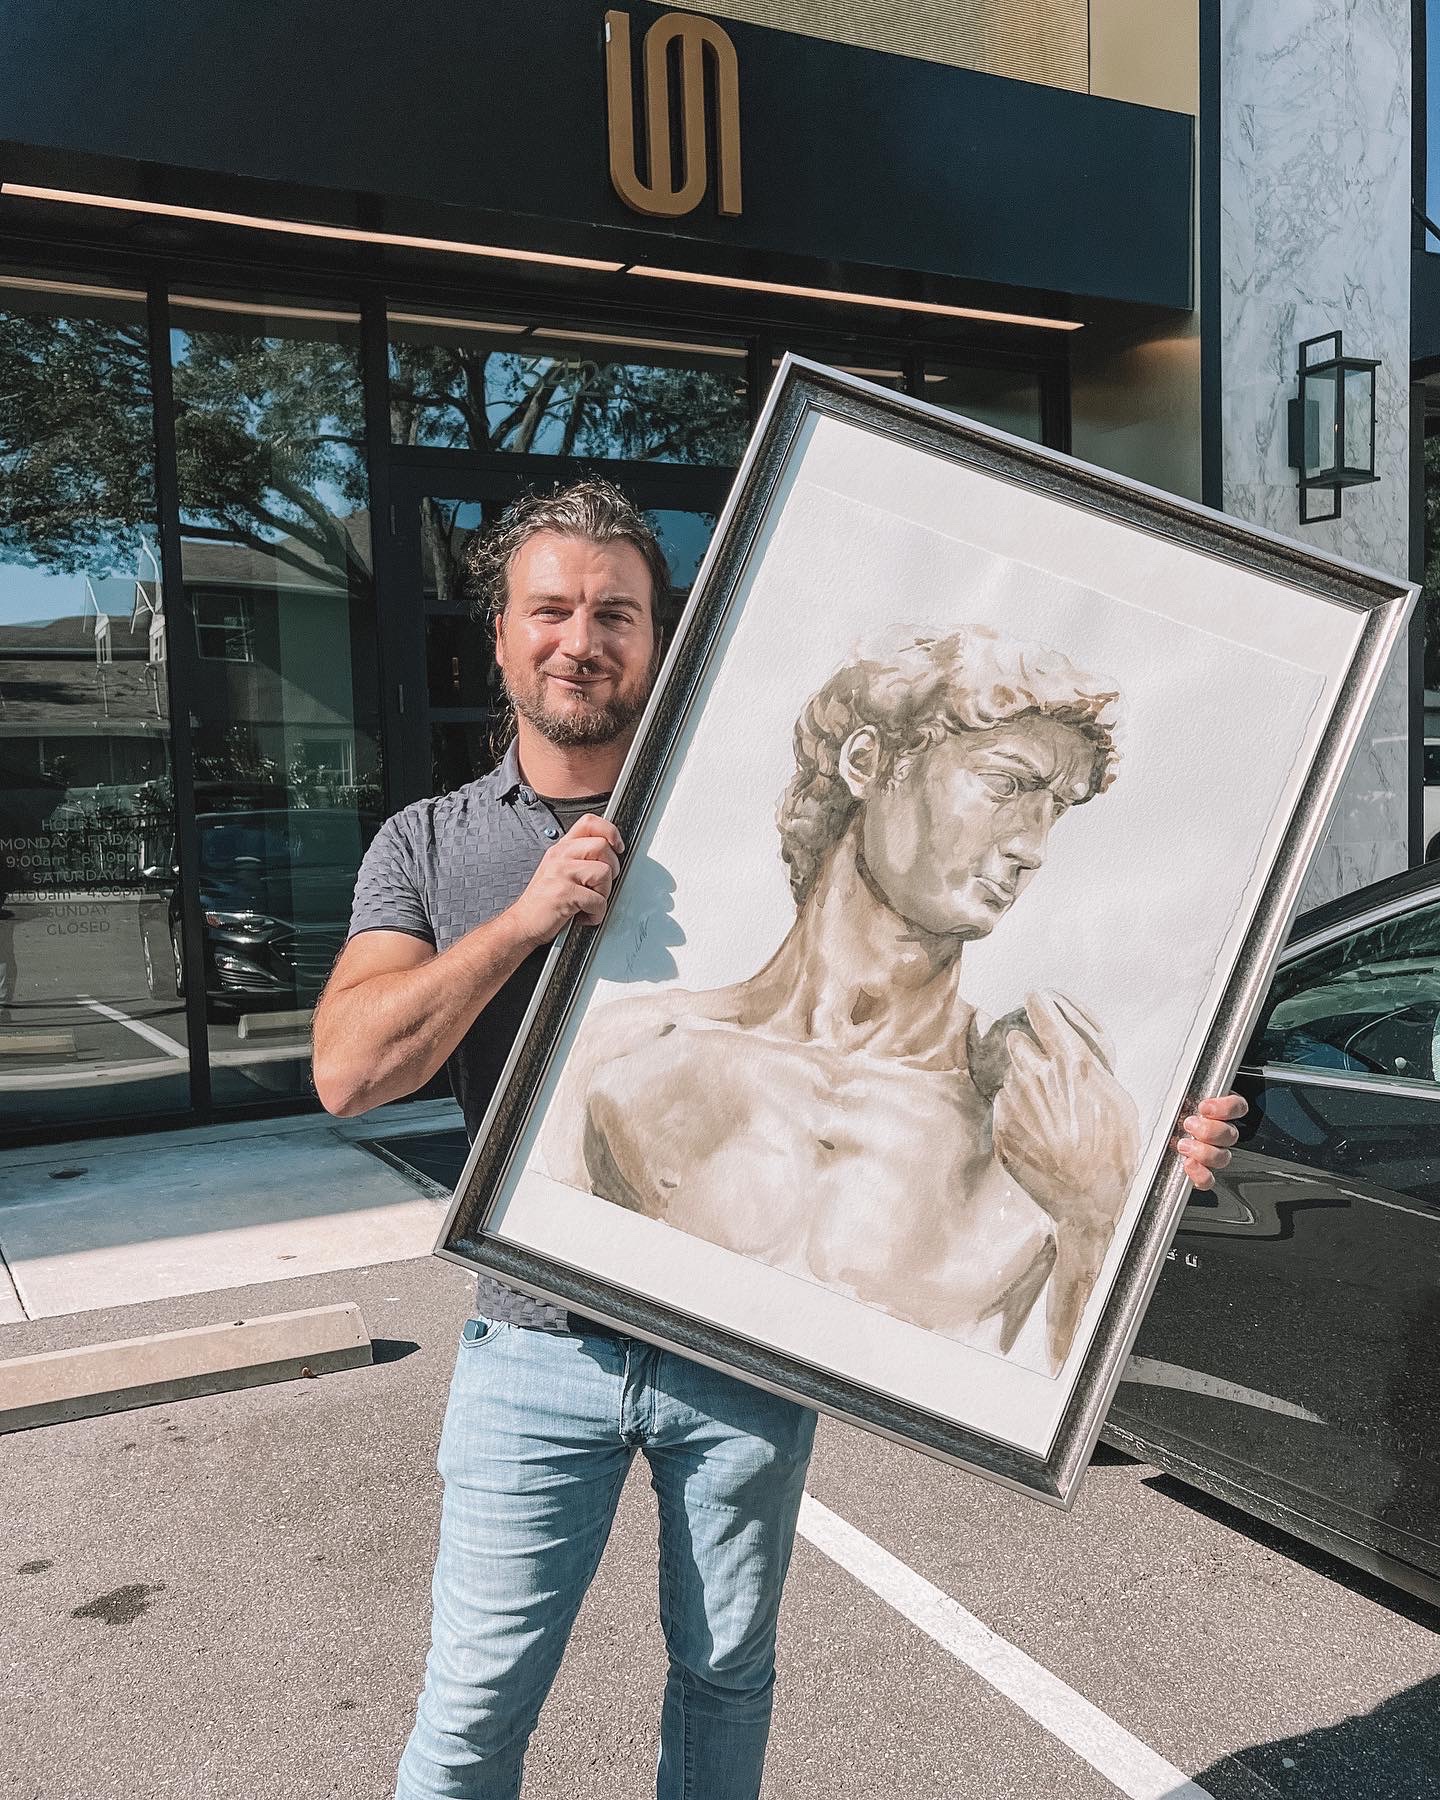 A breathtaking watercolor triptych of Michelangelo's famous statue of David, now on display at Priano in Tampa, Florida.